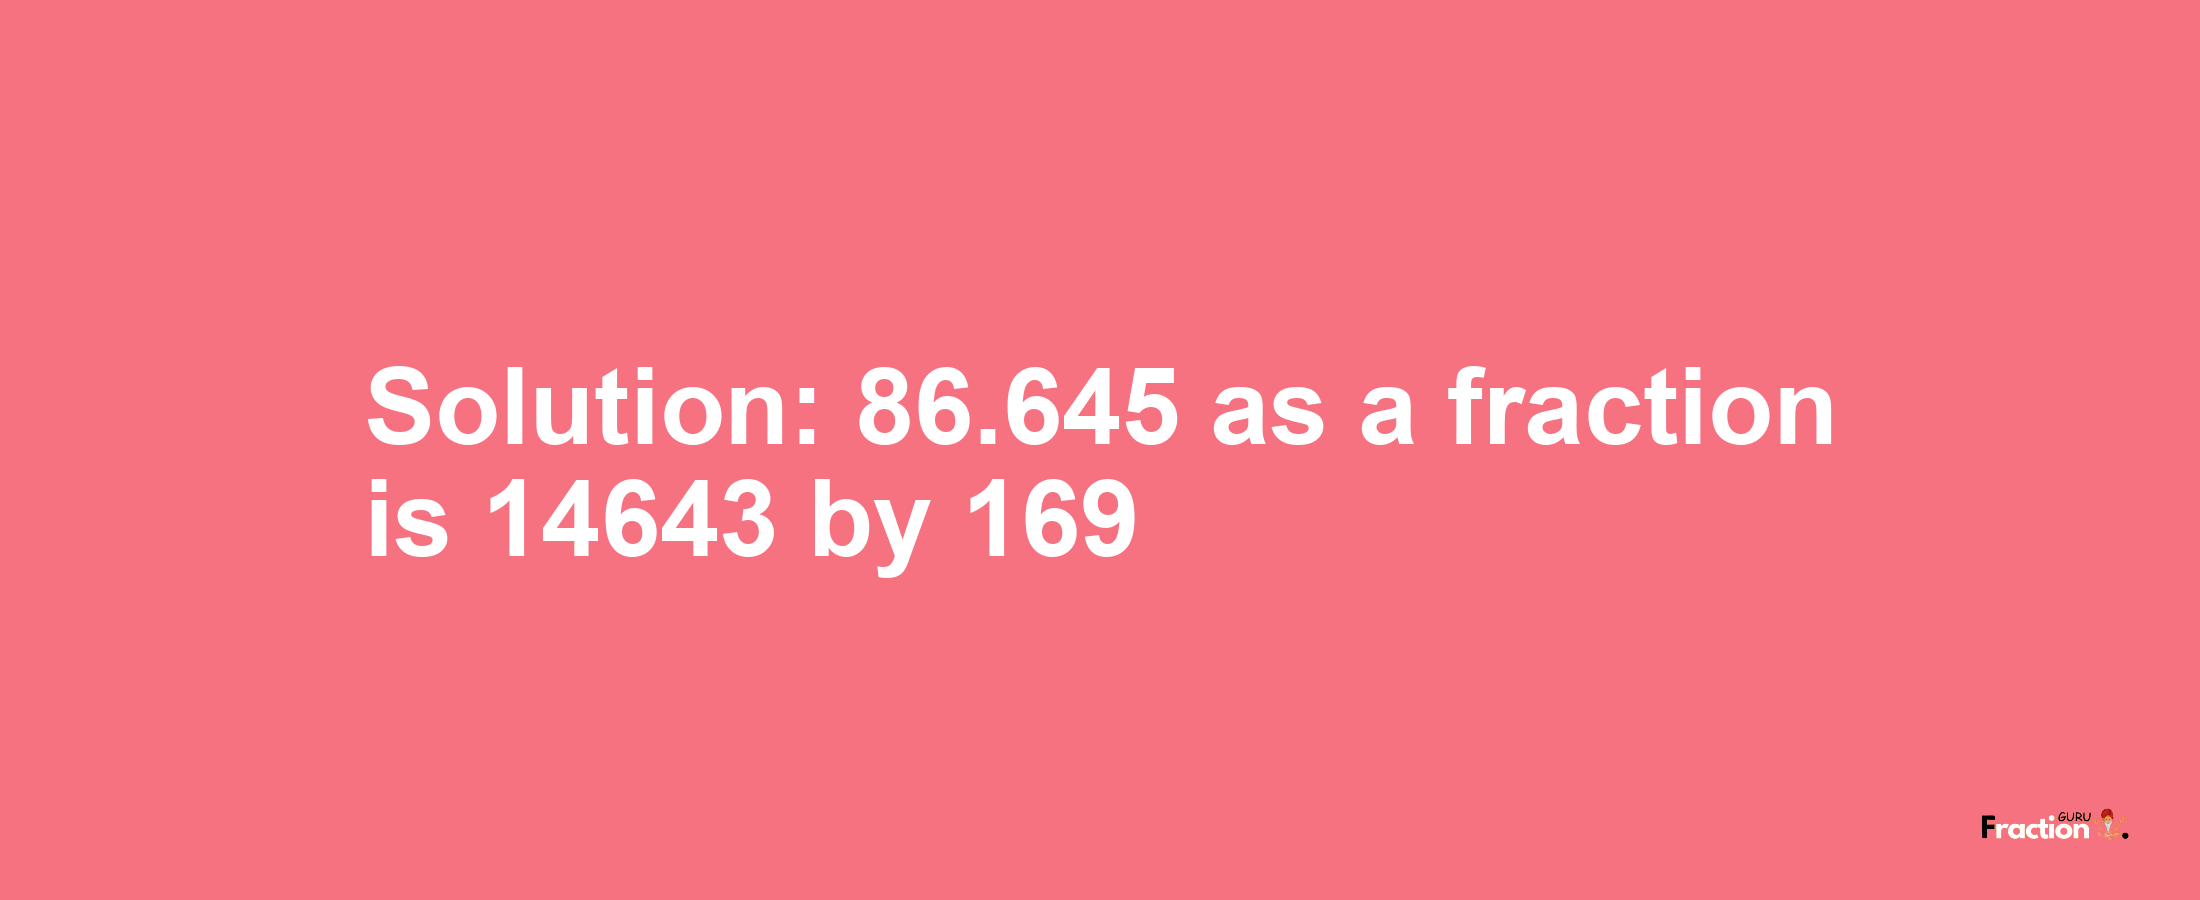 Solution:86.645 as a fraction is 14643/169